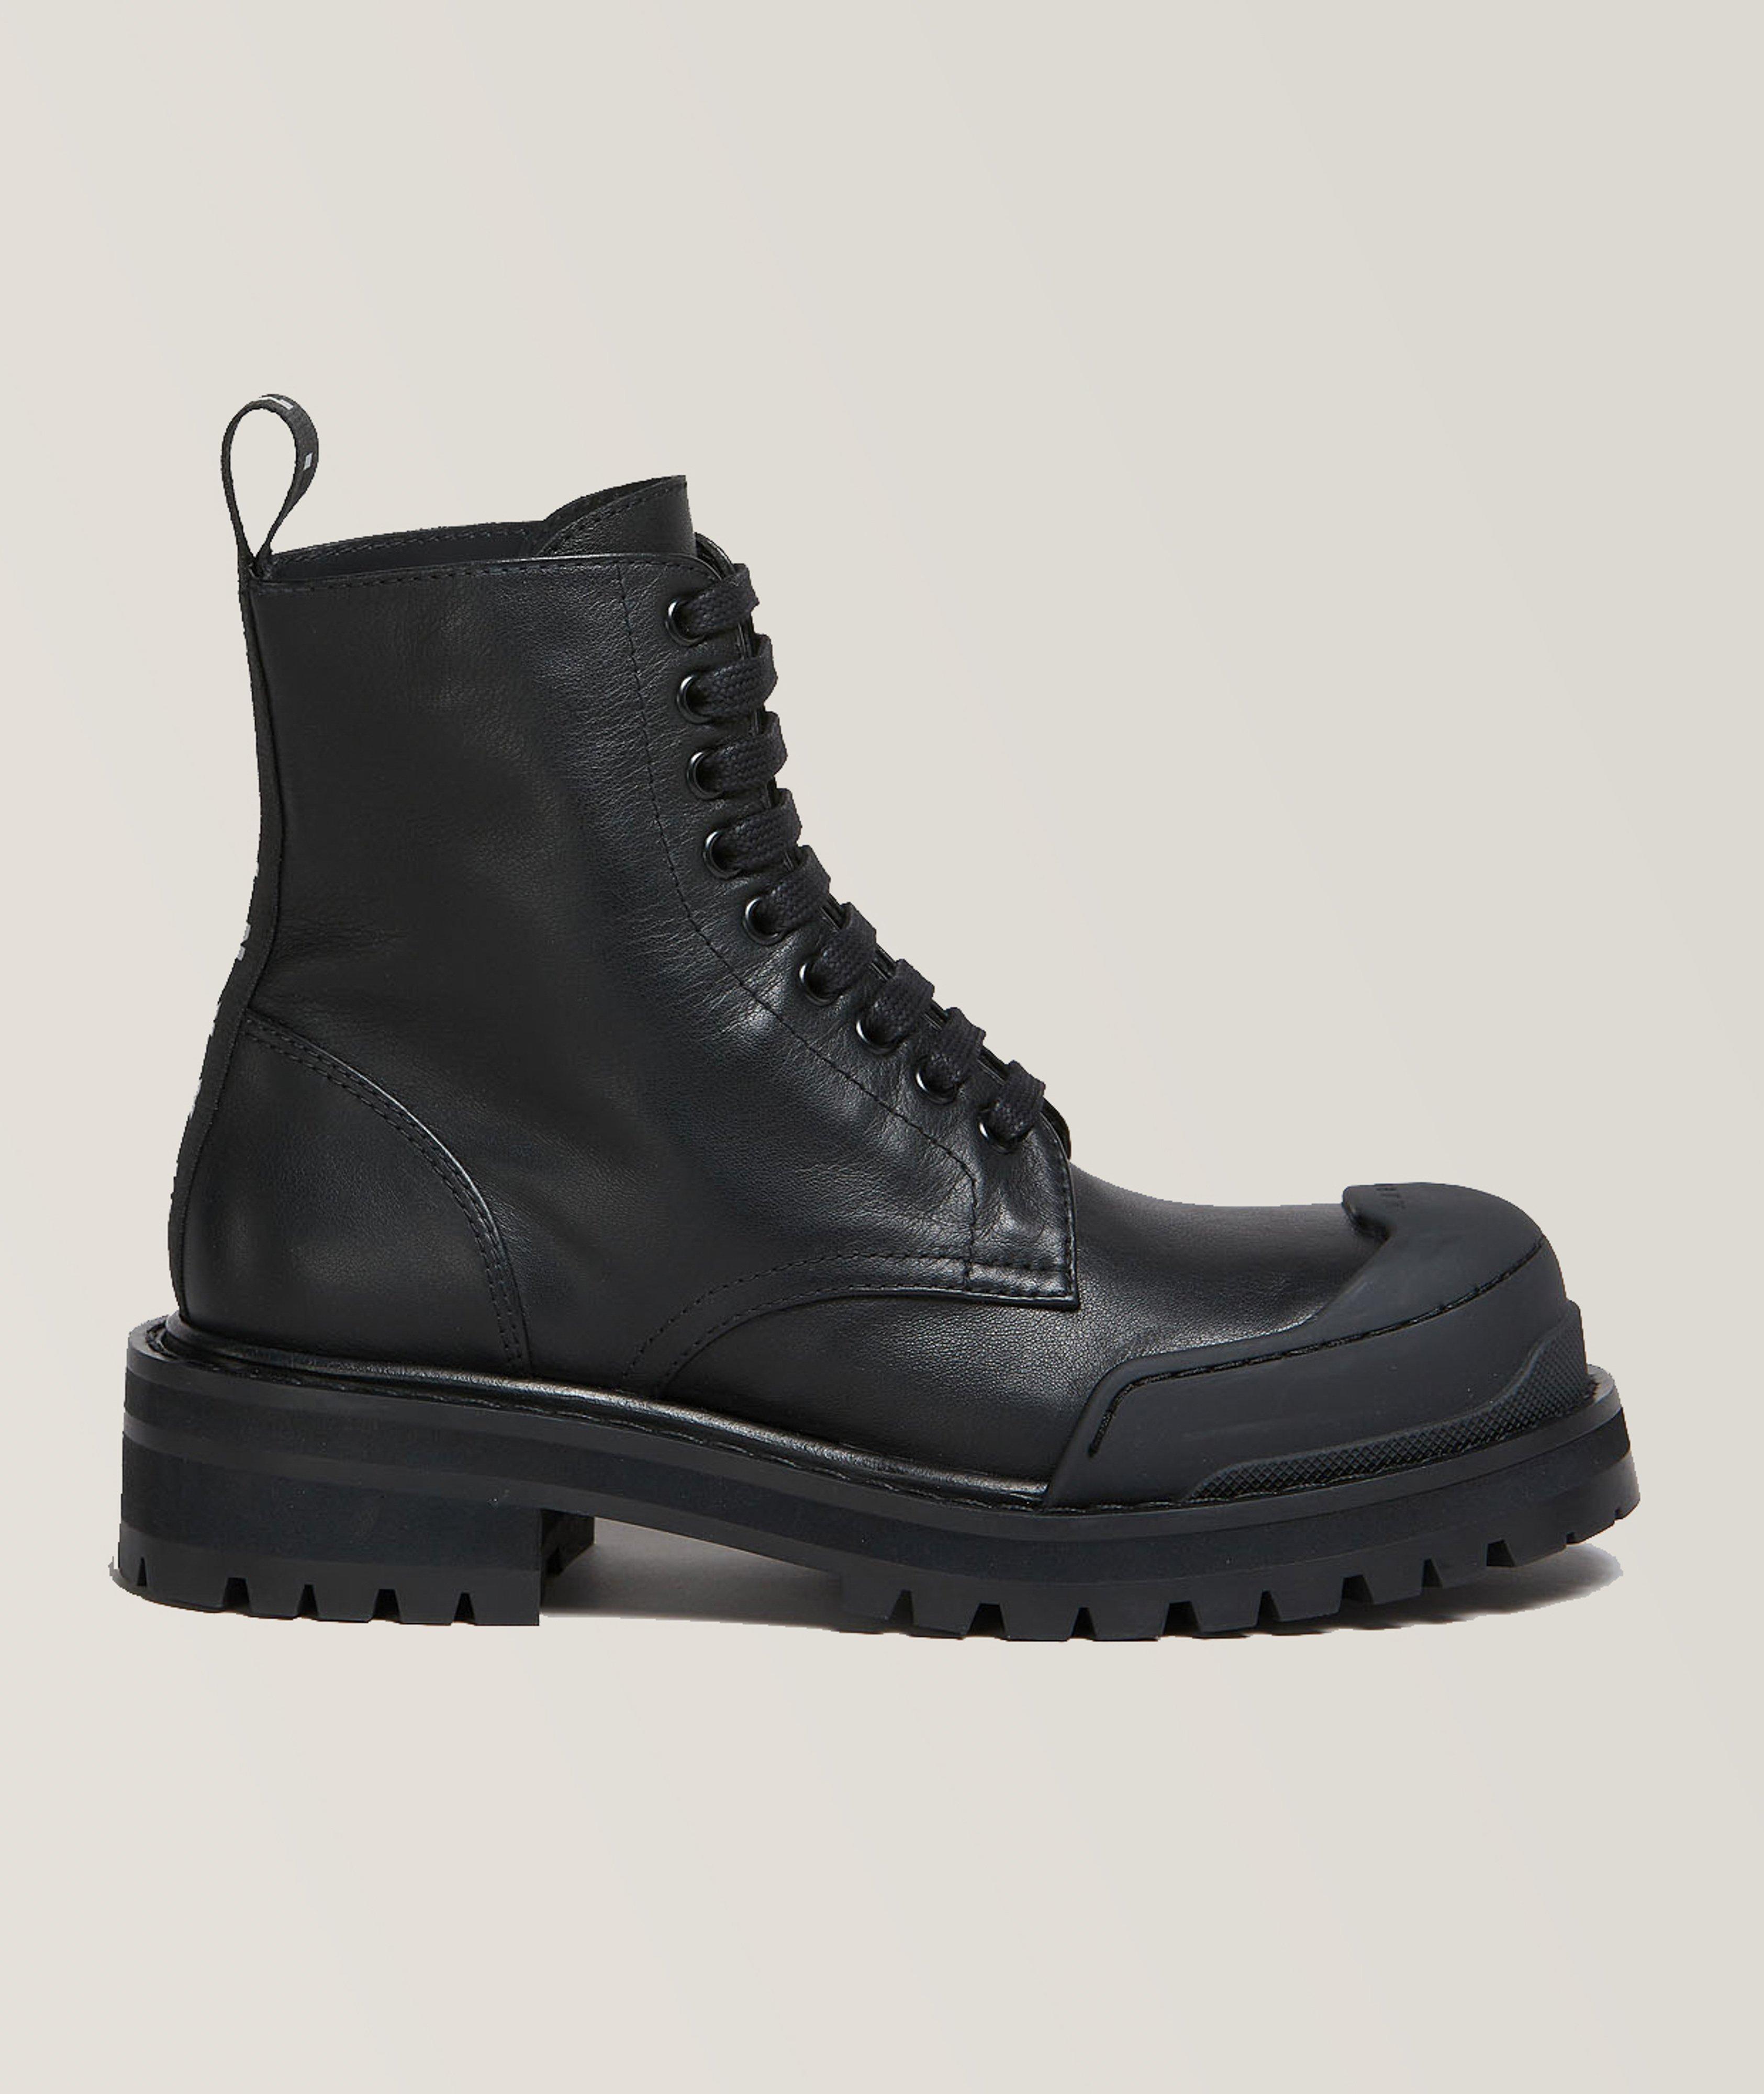 Chunky Toed Calf Leather Lace-up Combat Boots image 0